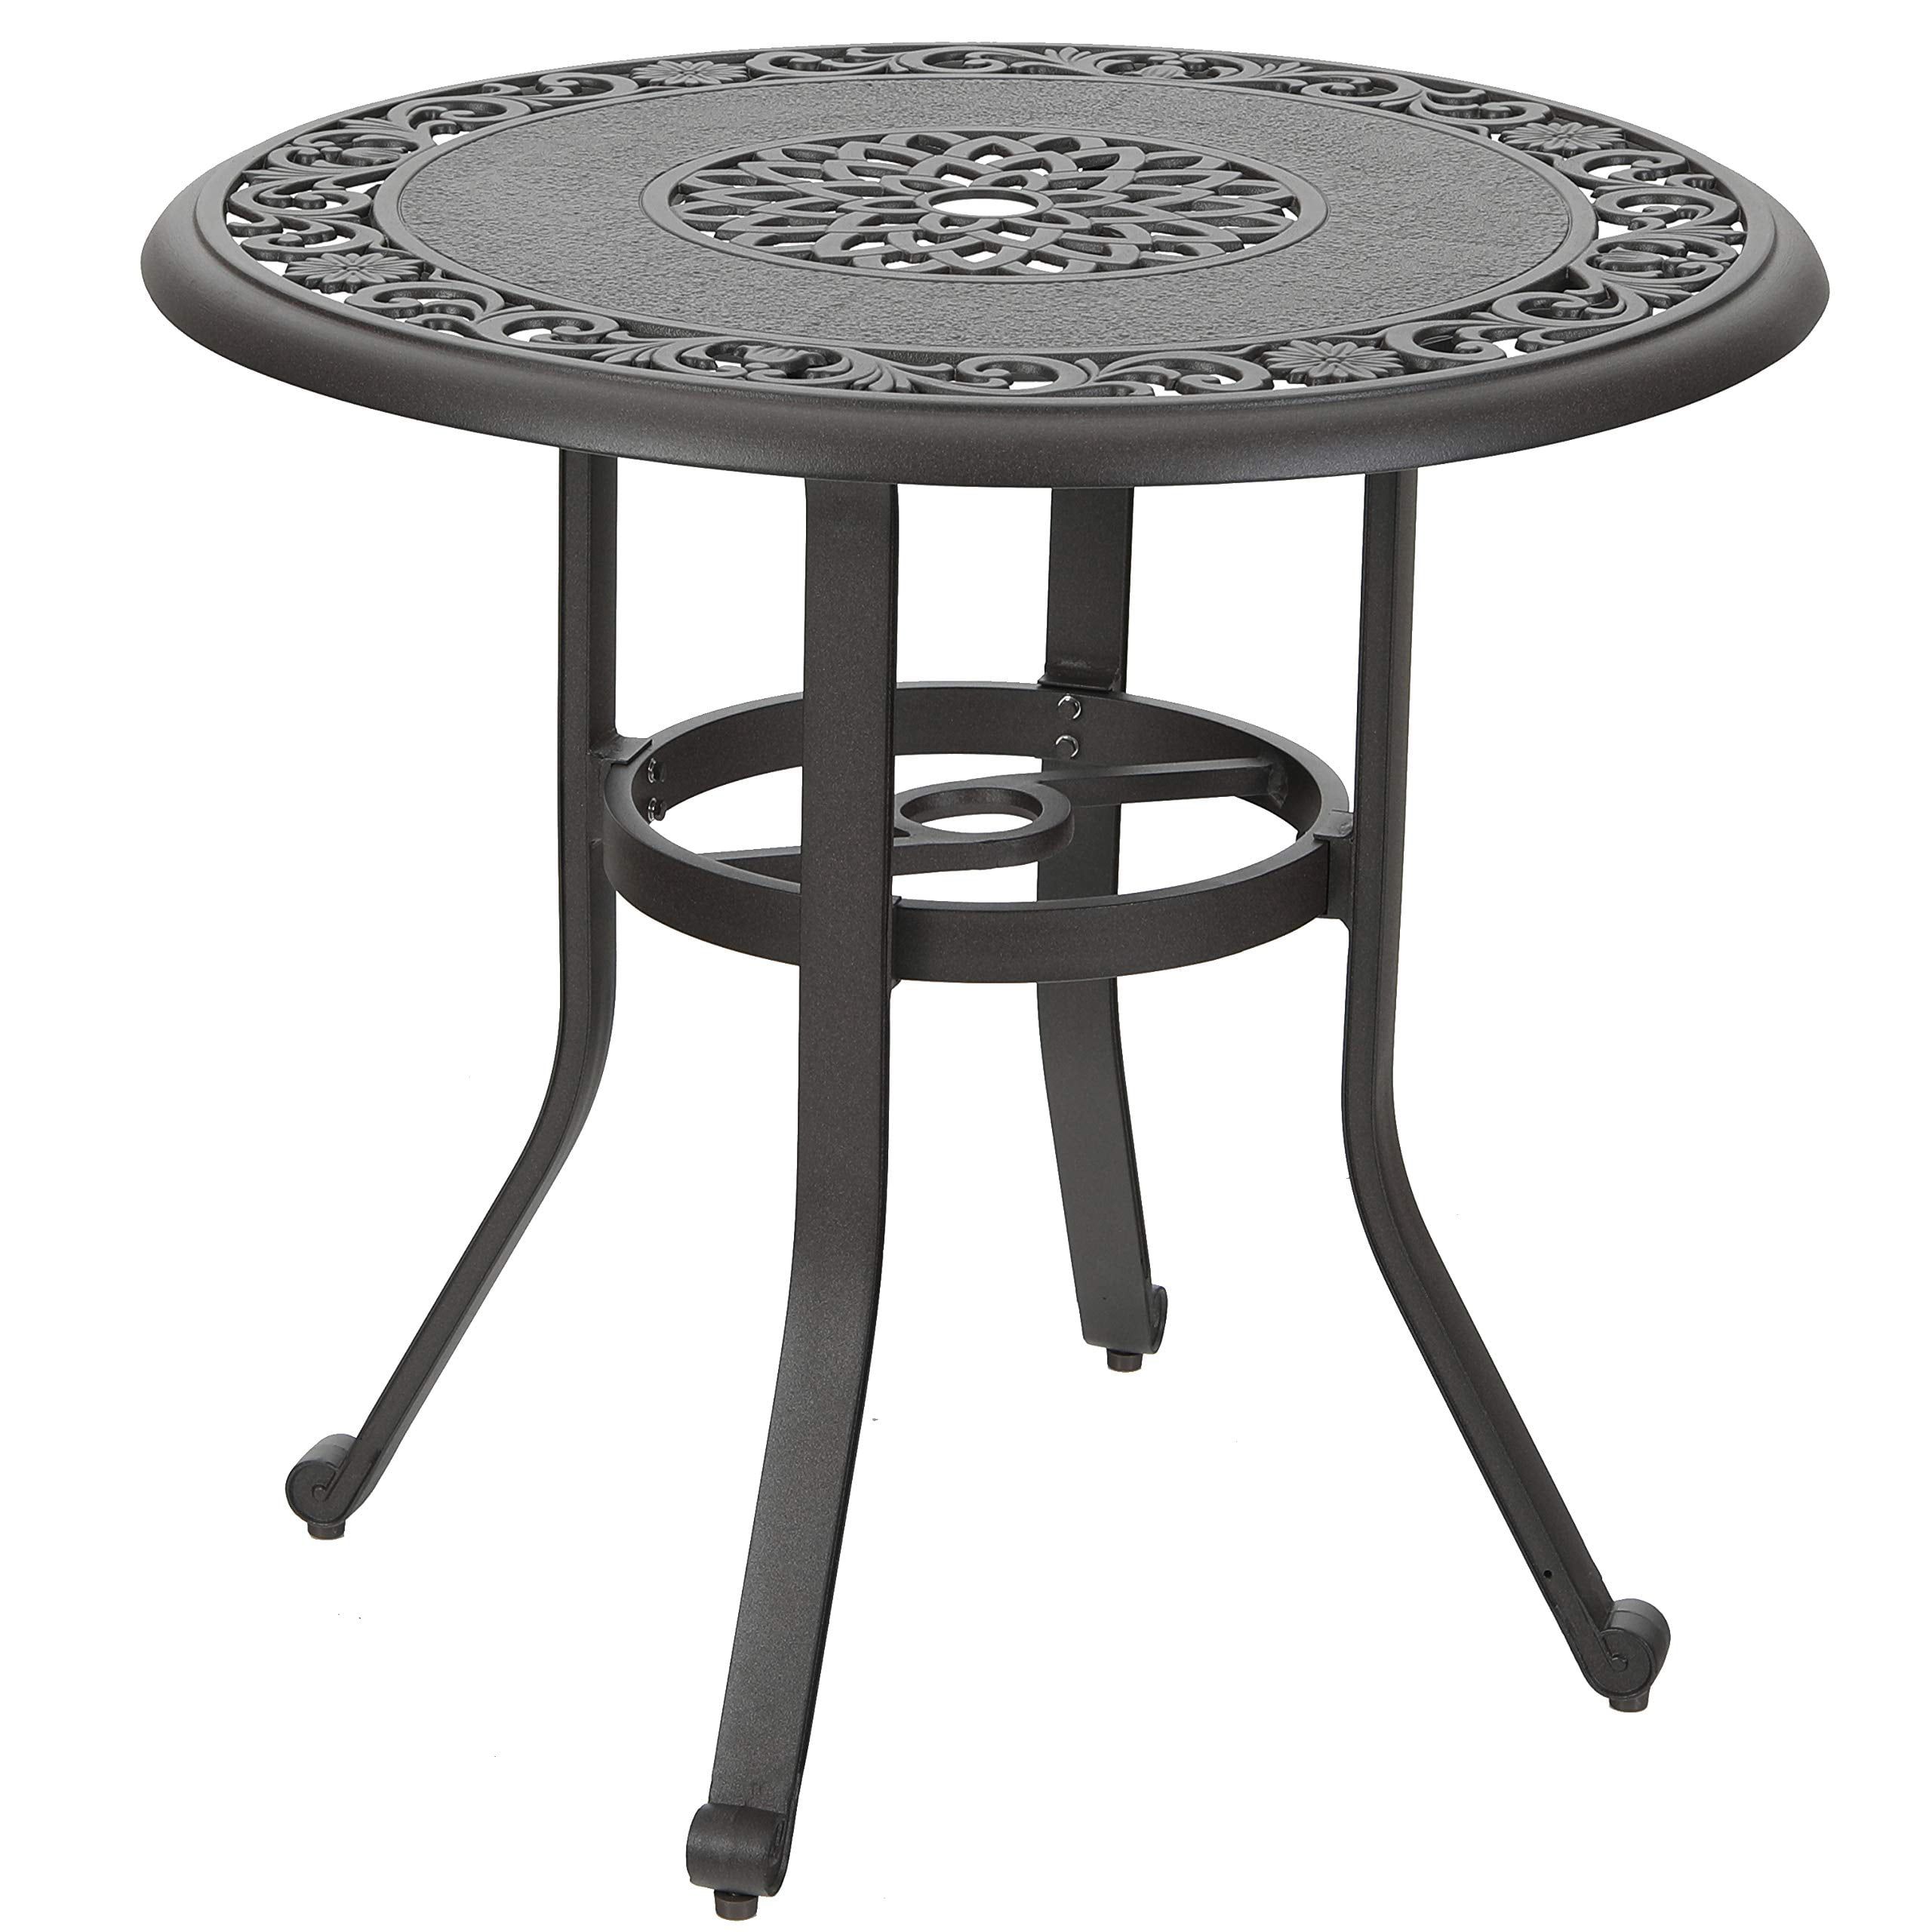 Mf Studio 32" Cast Aluminum Patio Outdoor Bistro Table, Round Dining Within Round Steel Patio Coffee Tables (View 15 of 15)